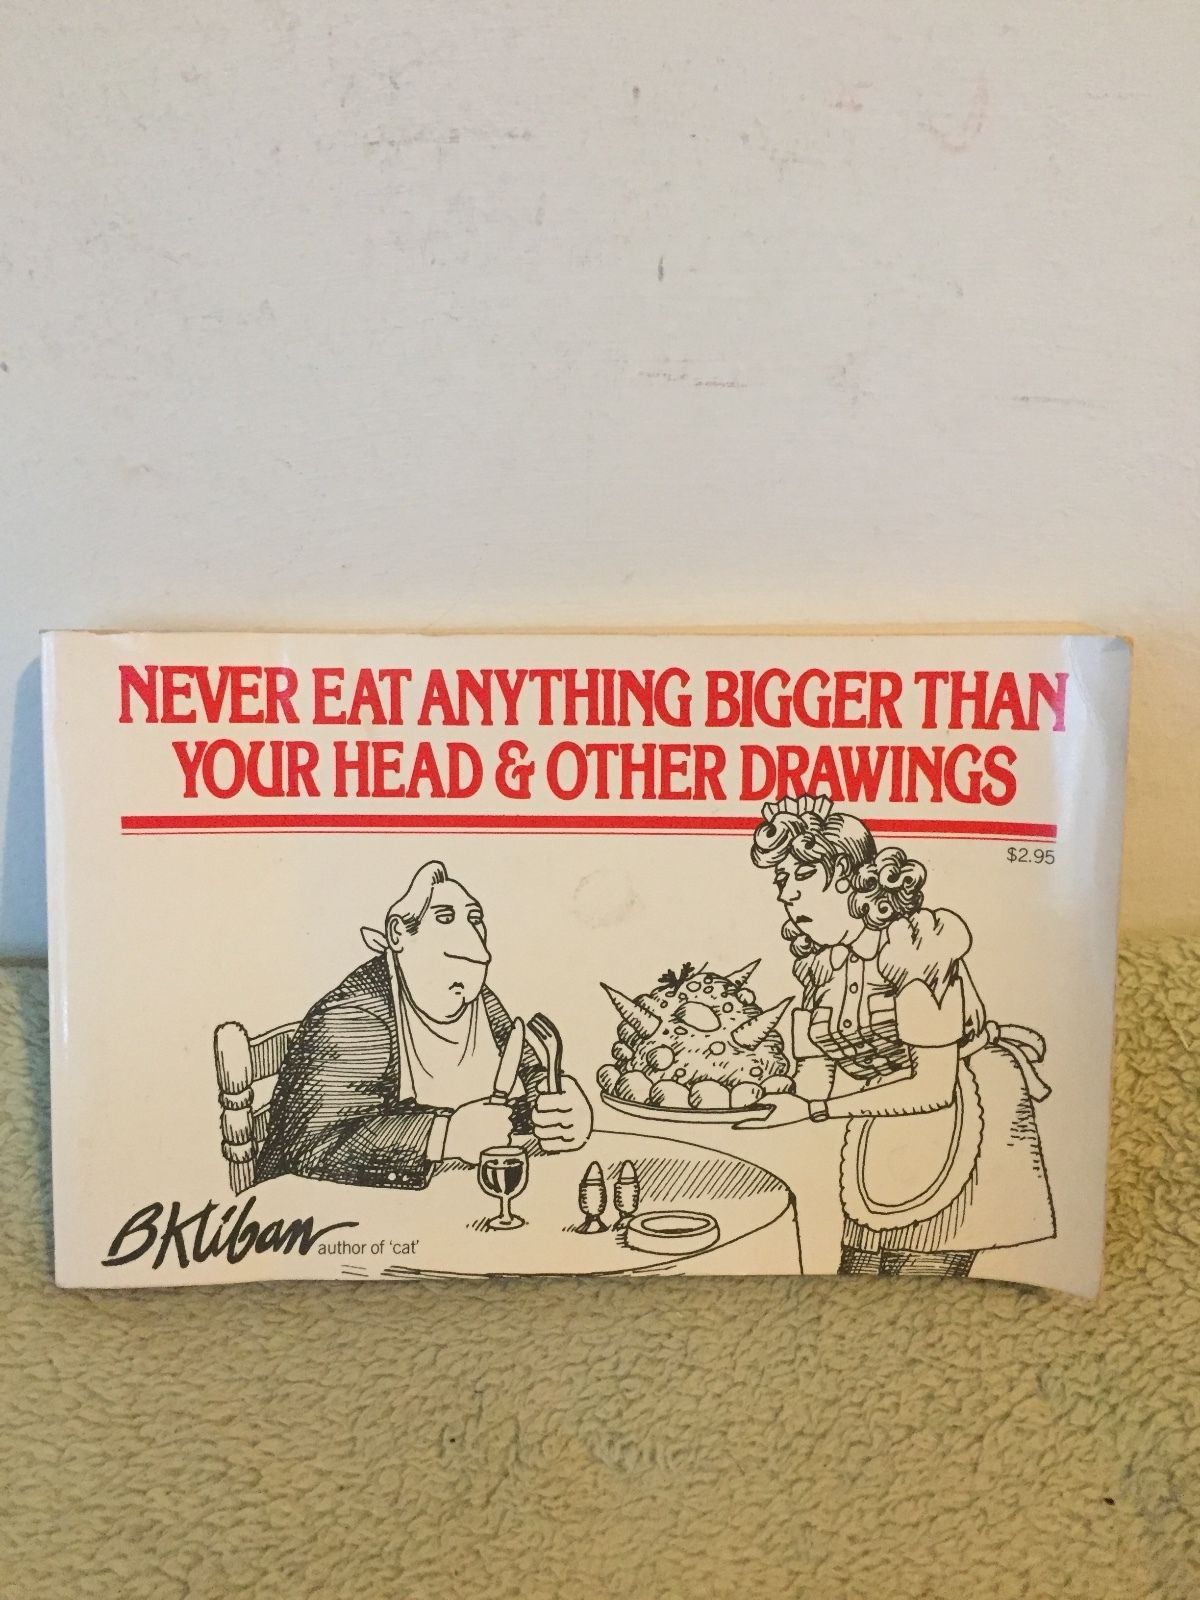 Never Eat Anything Bigger Than Your Head and Other Drawings (1976) by B